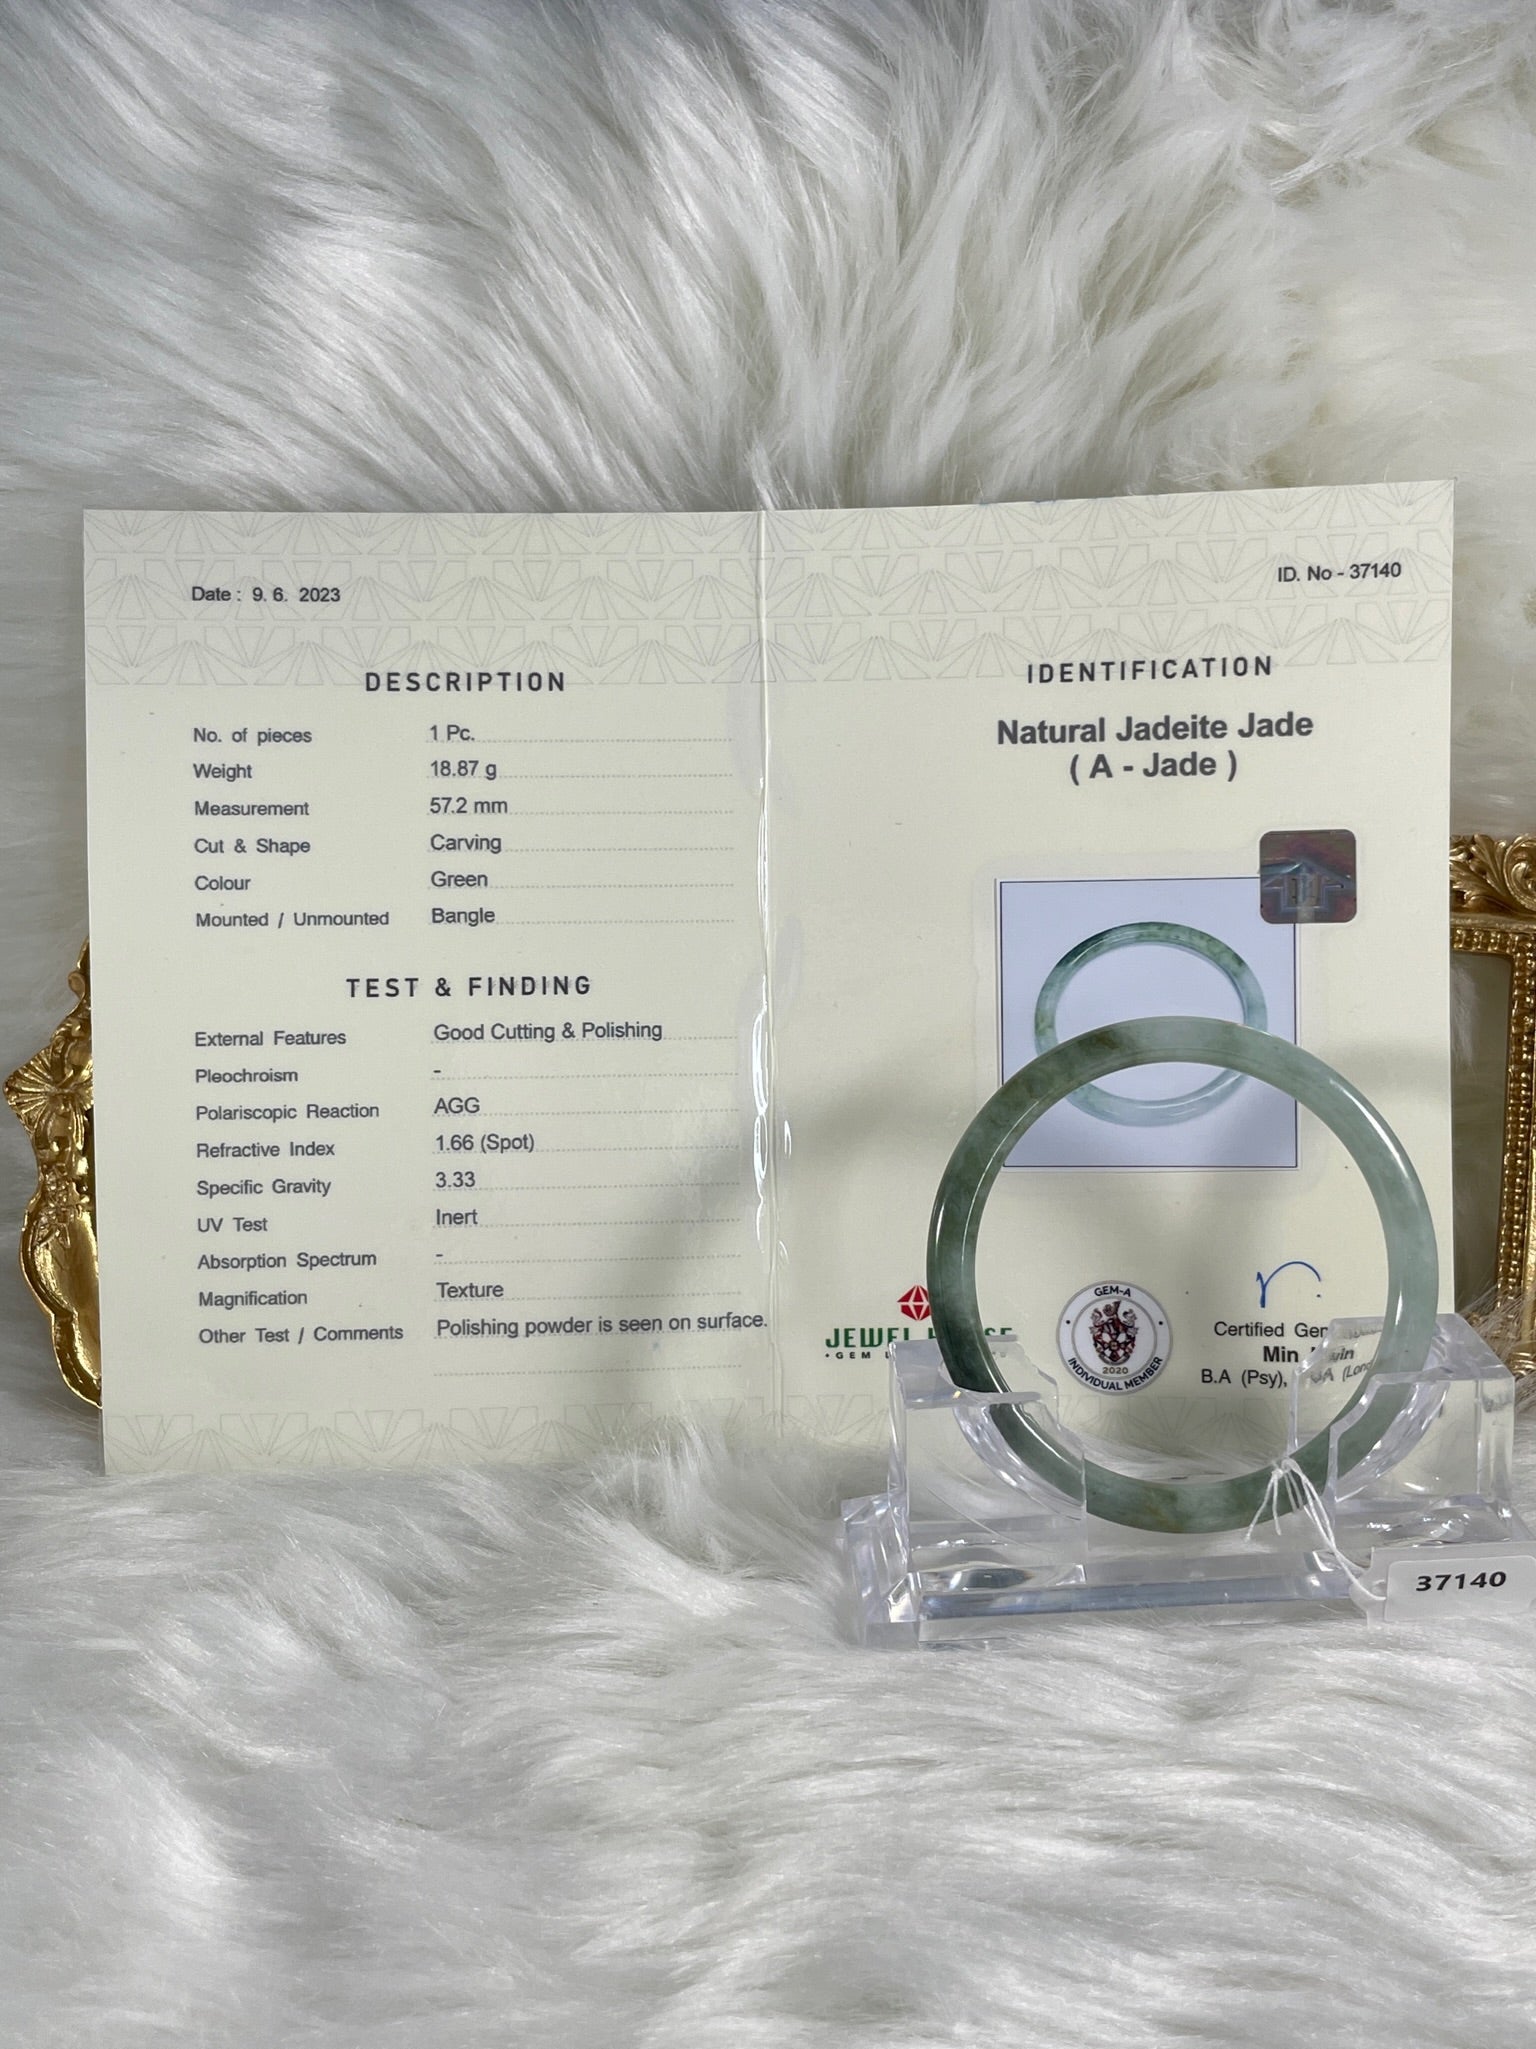 Grade A Natural Jade Bangle with certificate #37140